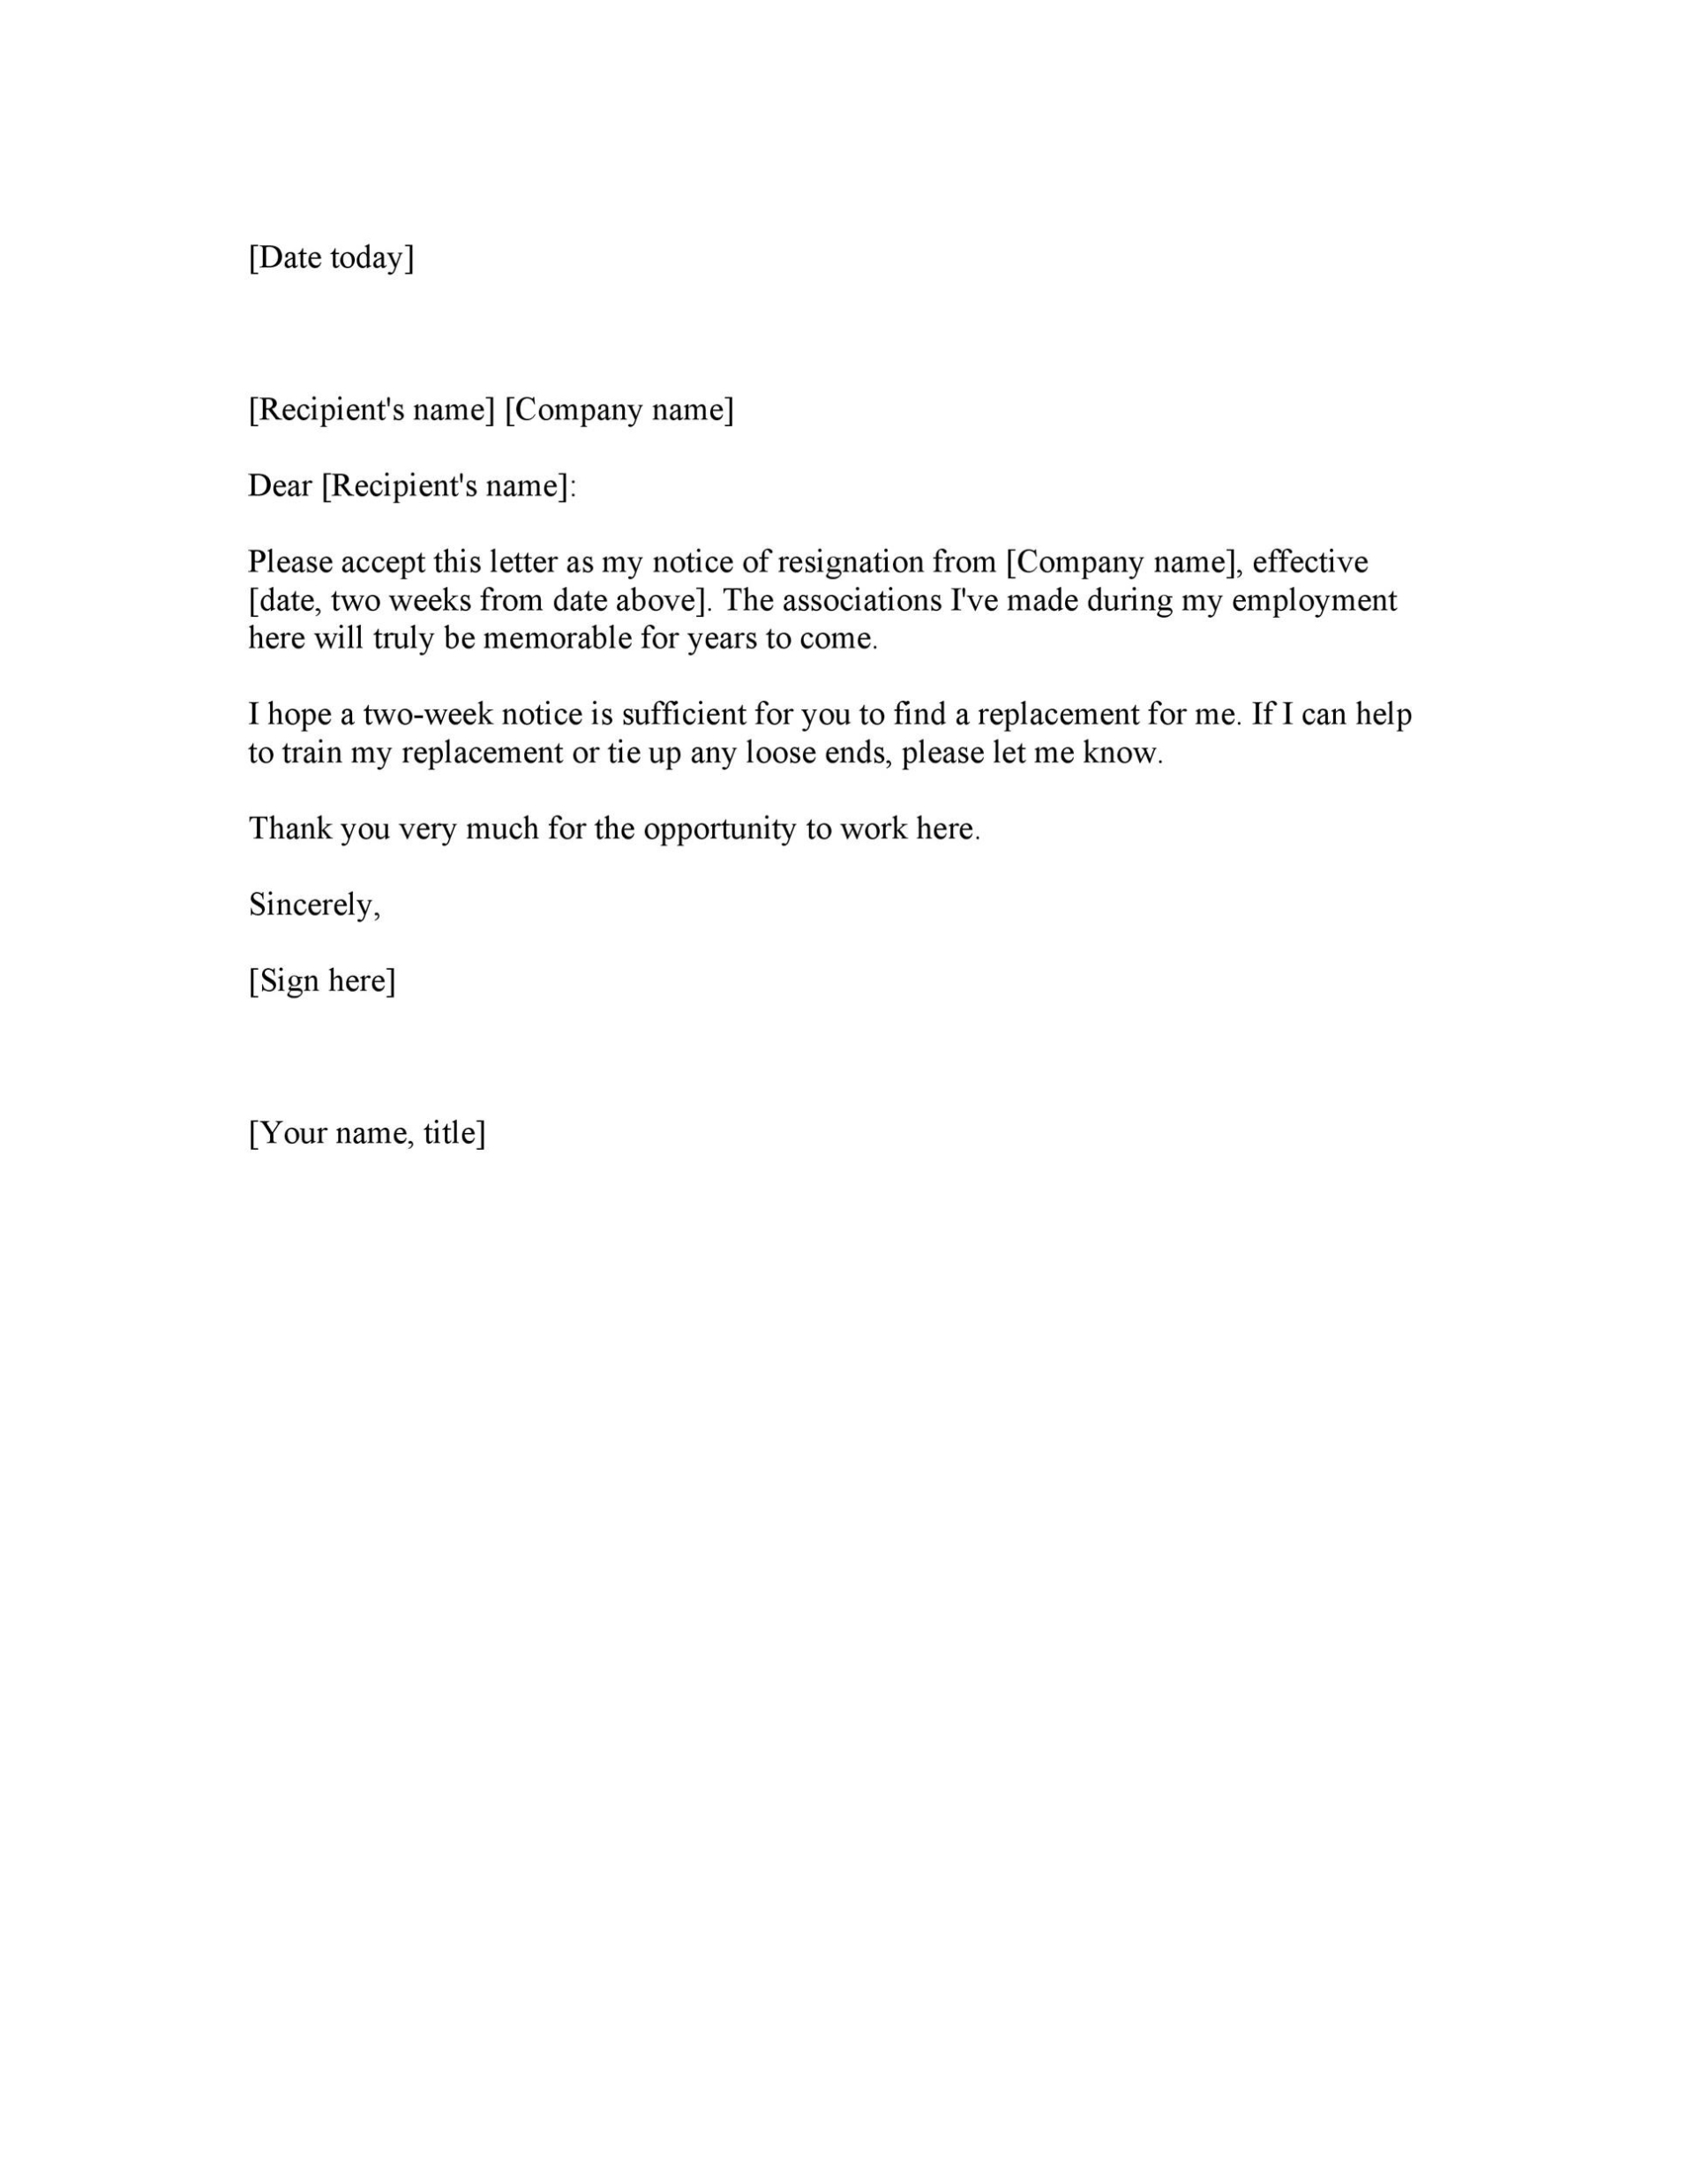 Letter Of Resignation 2 Week Notice Database | Letter Template Collection Throughout Draft Letter Of Resignation Template